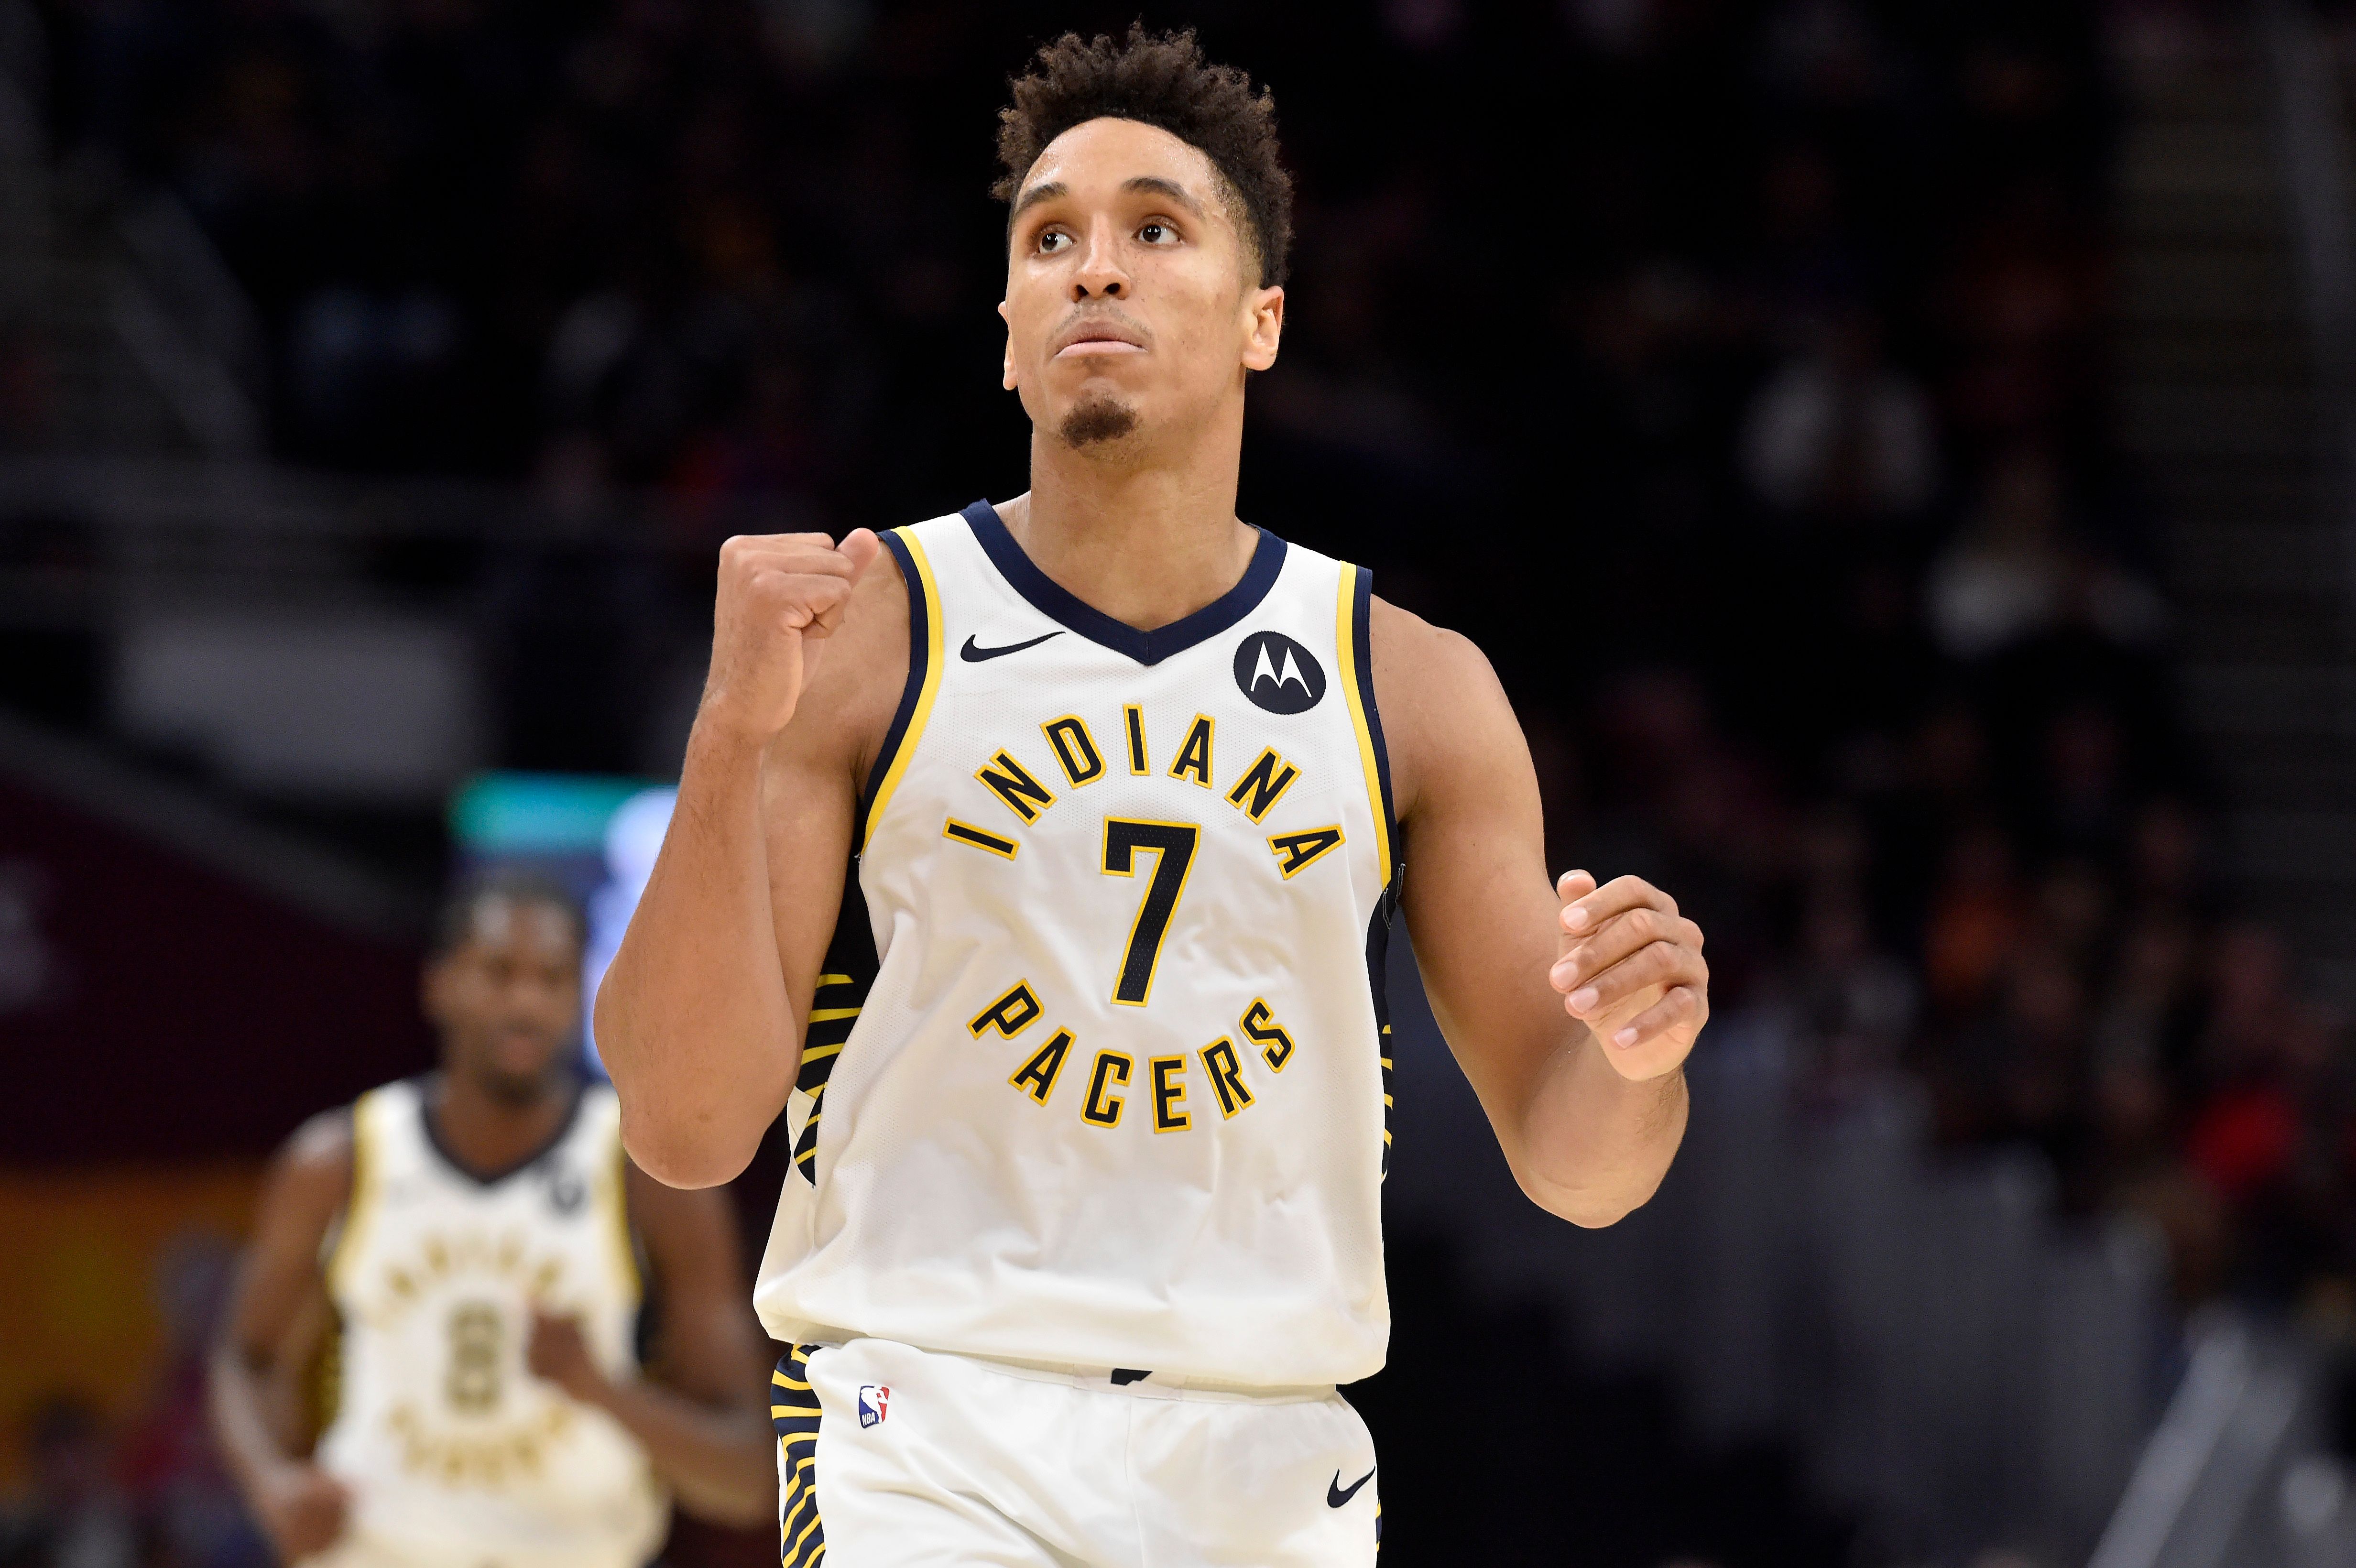 Malcolm Brogdon reacts to a successful shot